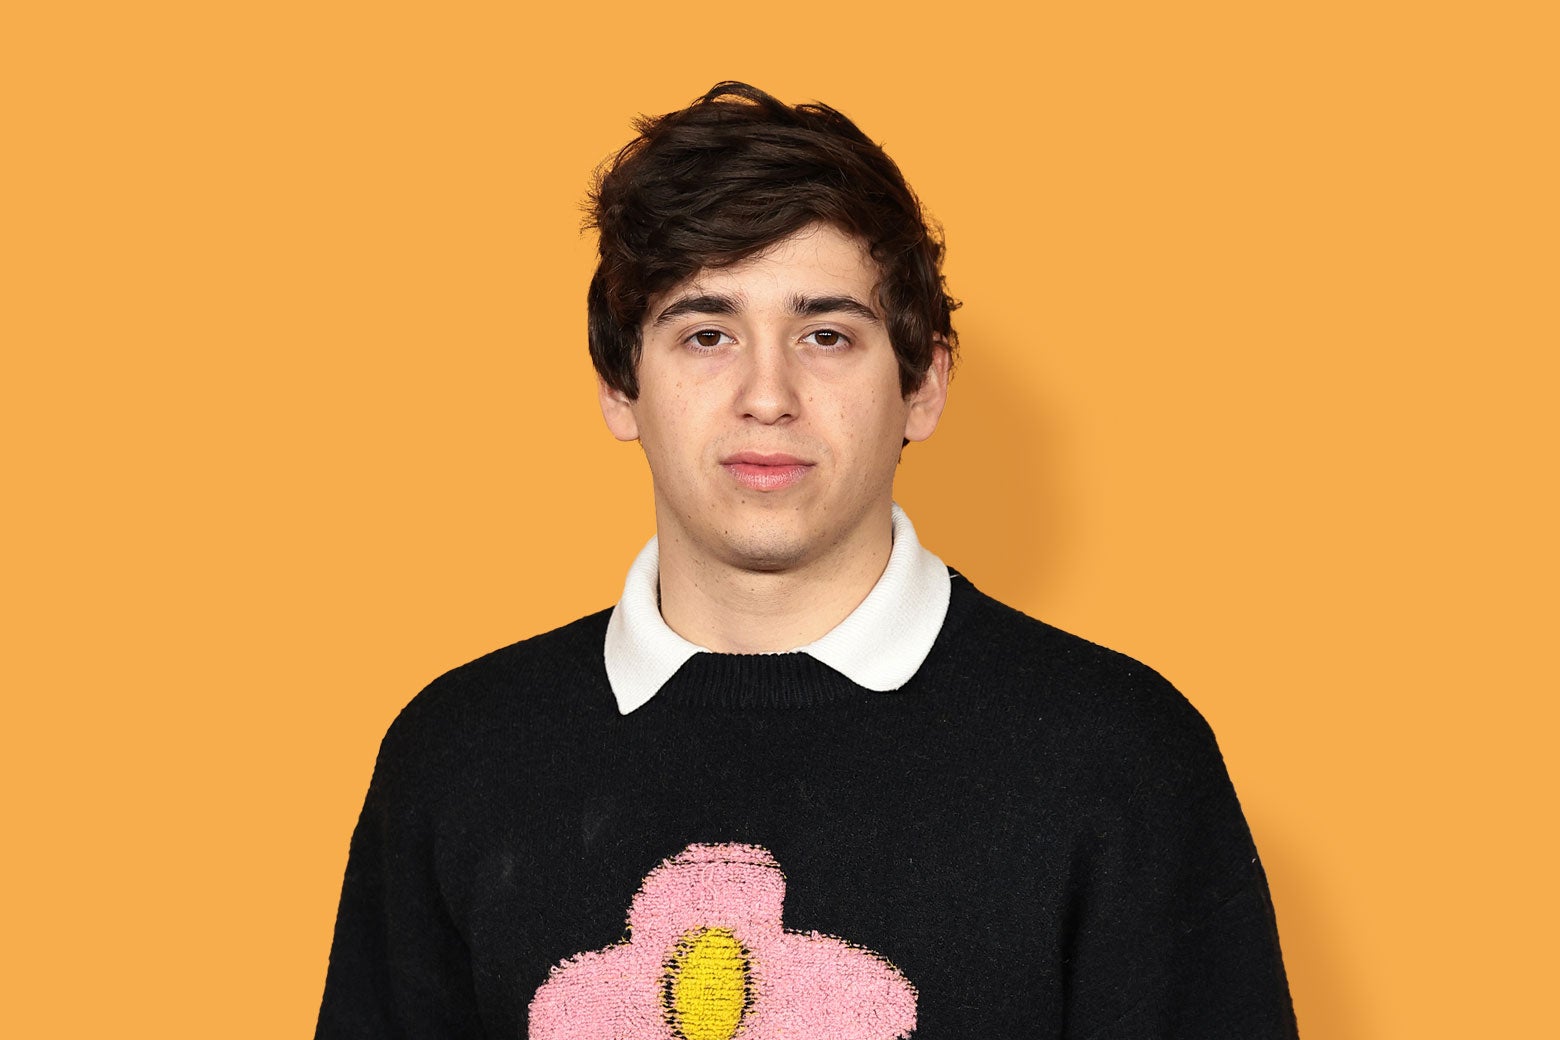 Marcello Hernández wearing a flower sweater, against an orange background.